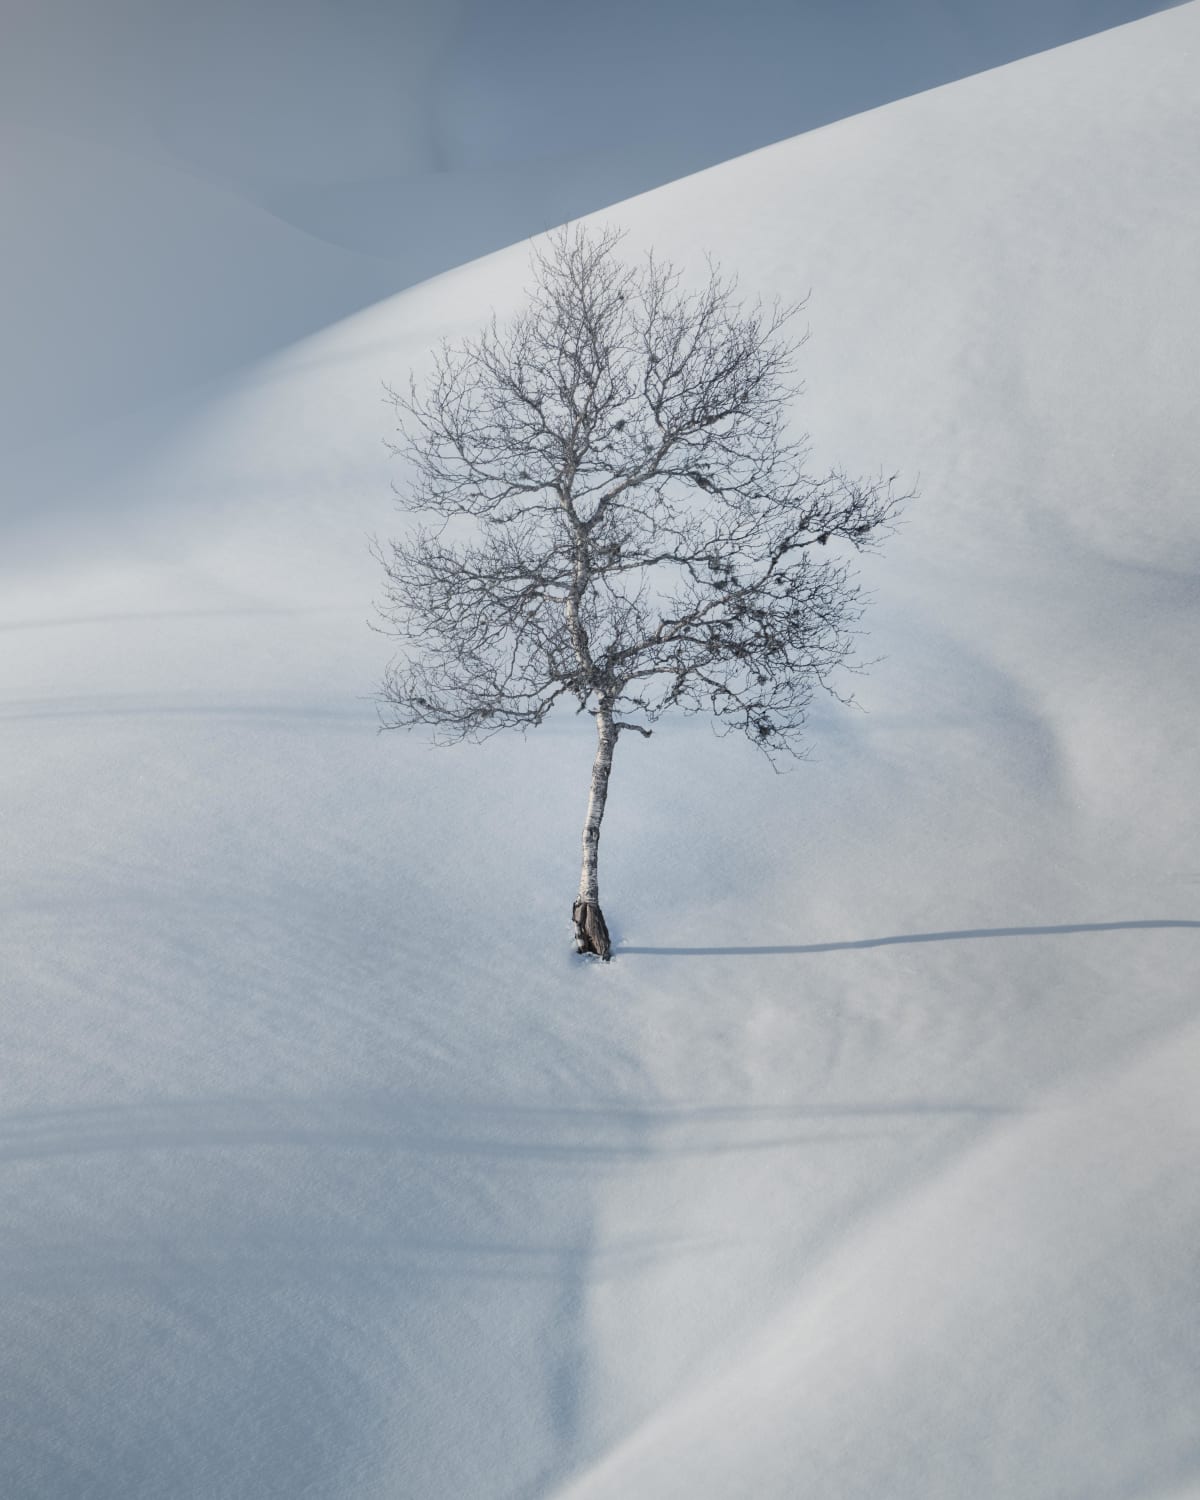 Found this lonely tree in Eikedalen, Norway.